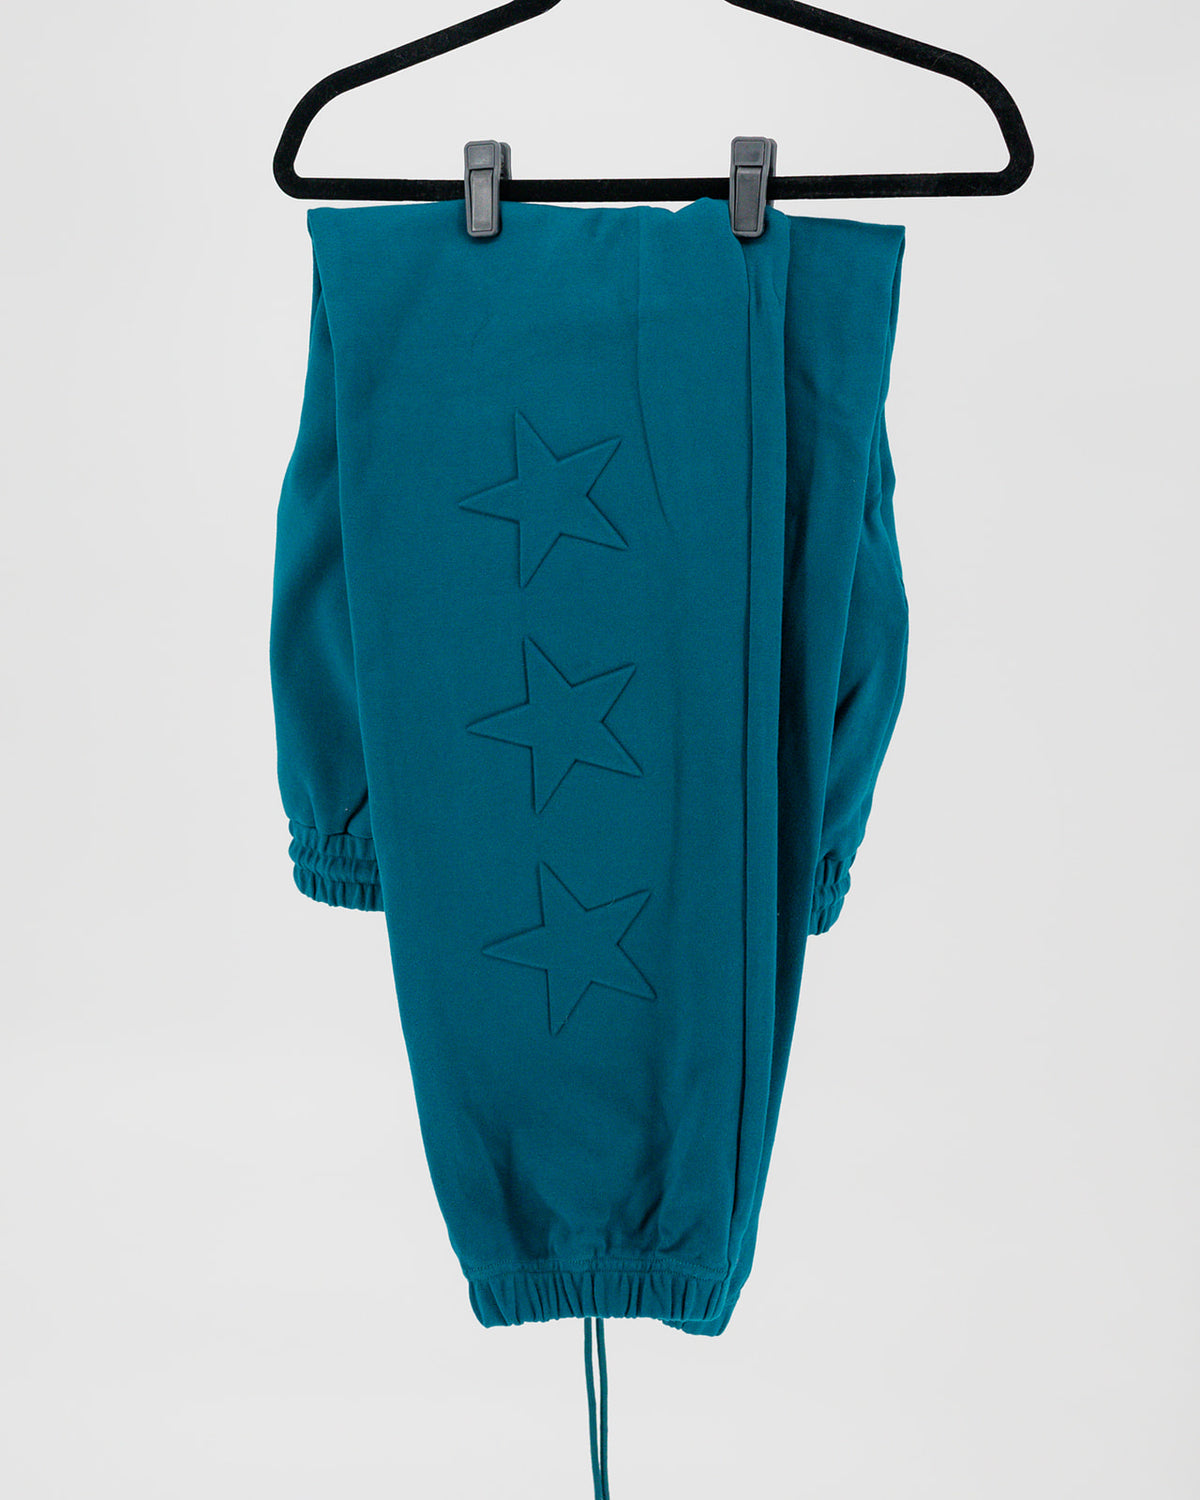 Baby You're A Star sweatpants